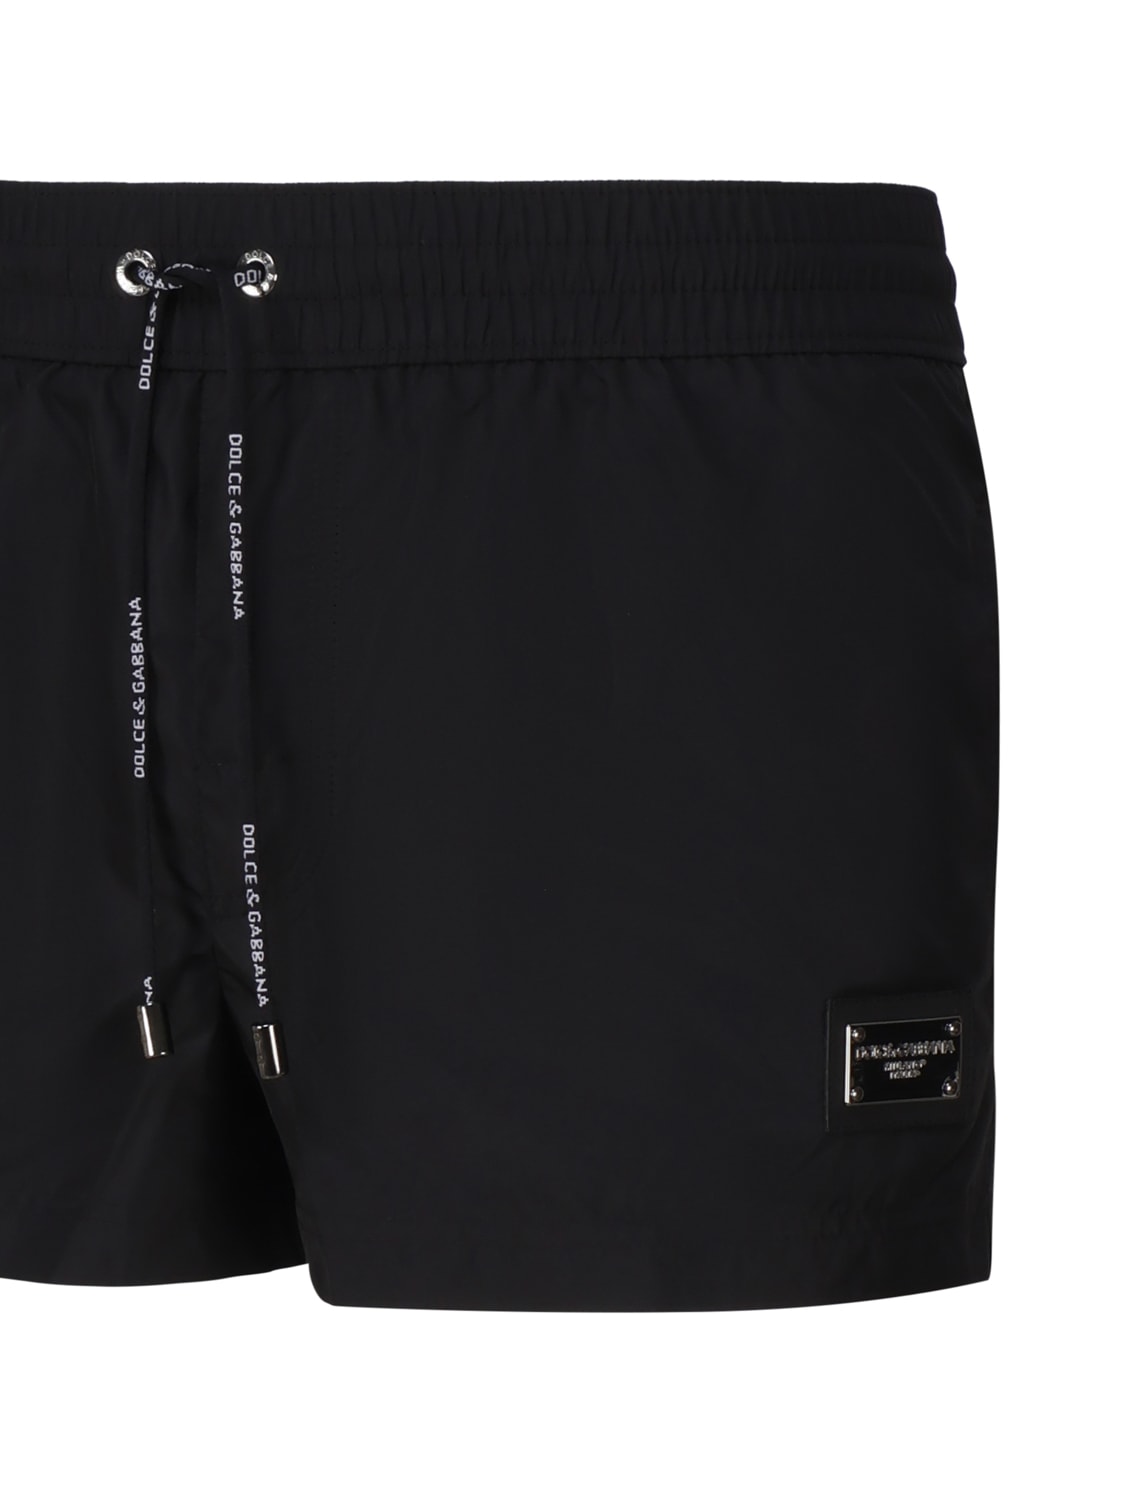 Shop Dolce & Gabbana Short Beach Boxer Shorts Made Of Lightweight Nylon With Metal Logo Plaque In Black